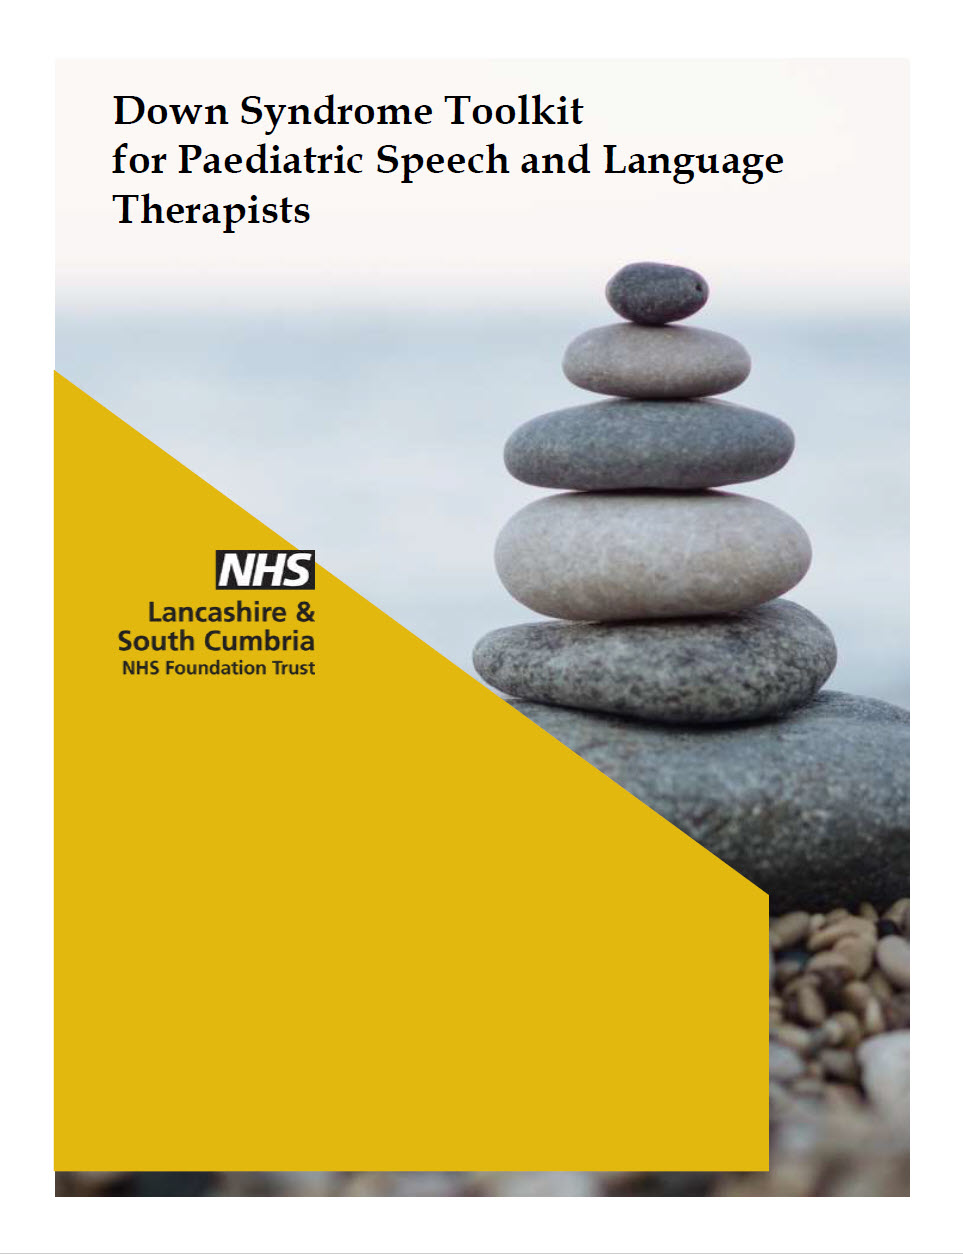 The cover of the Down Syndrome Toolkit for Pediatric Speech and Language Therapists.